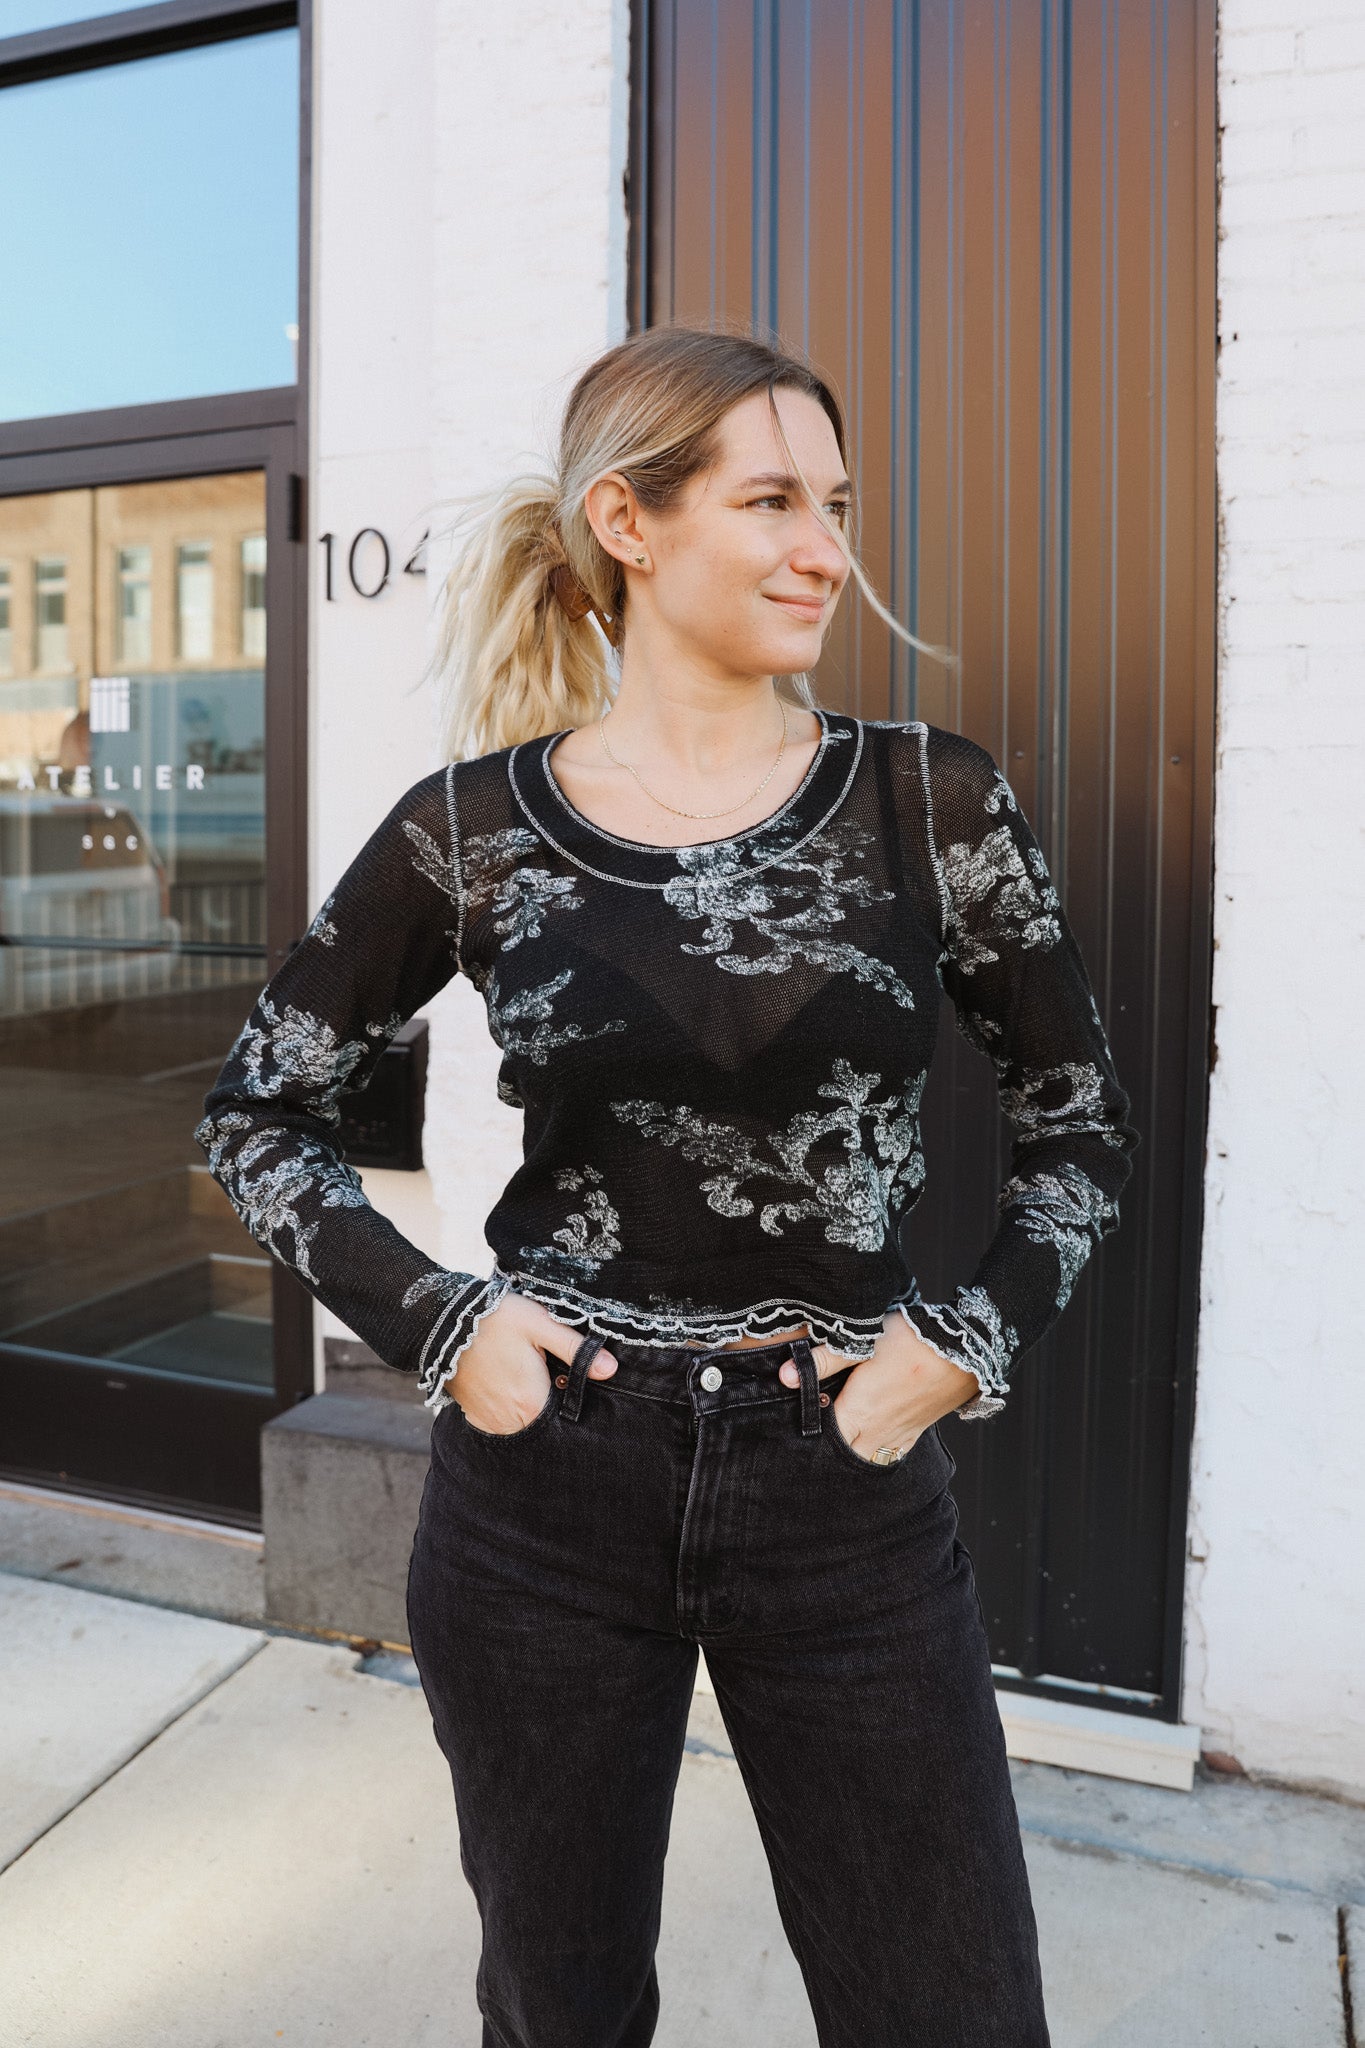 So sweet and staple in a stunning floral print, this forever classic long sleeve tee is featured in a timeless knit fabrication with defined seaming and neckline and lettuce-style trim for added dimension.